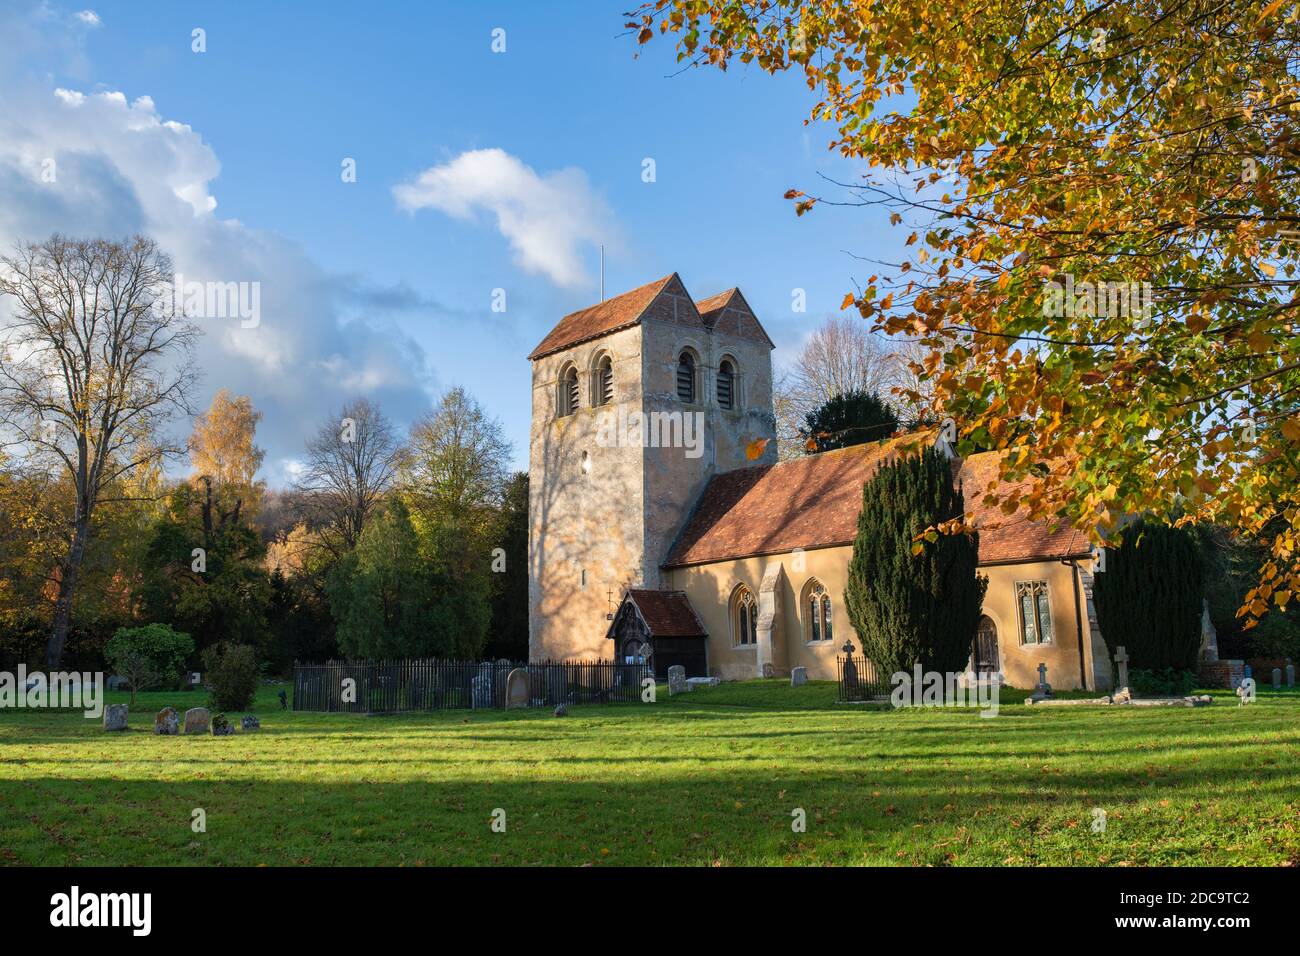 St Bartholomew church in the autumn late afternoon light just before sunset. Fingest, Buckinghamshire, England Stock Photo